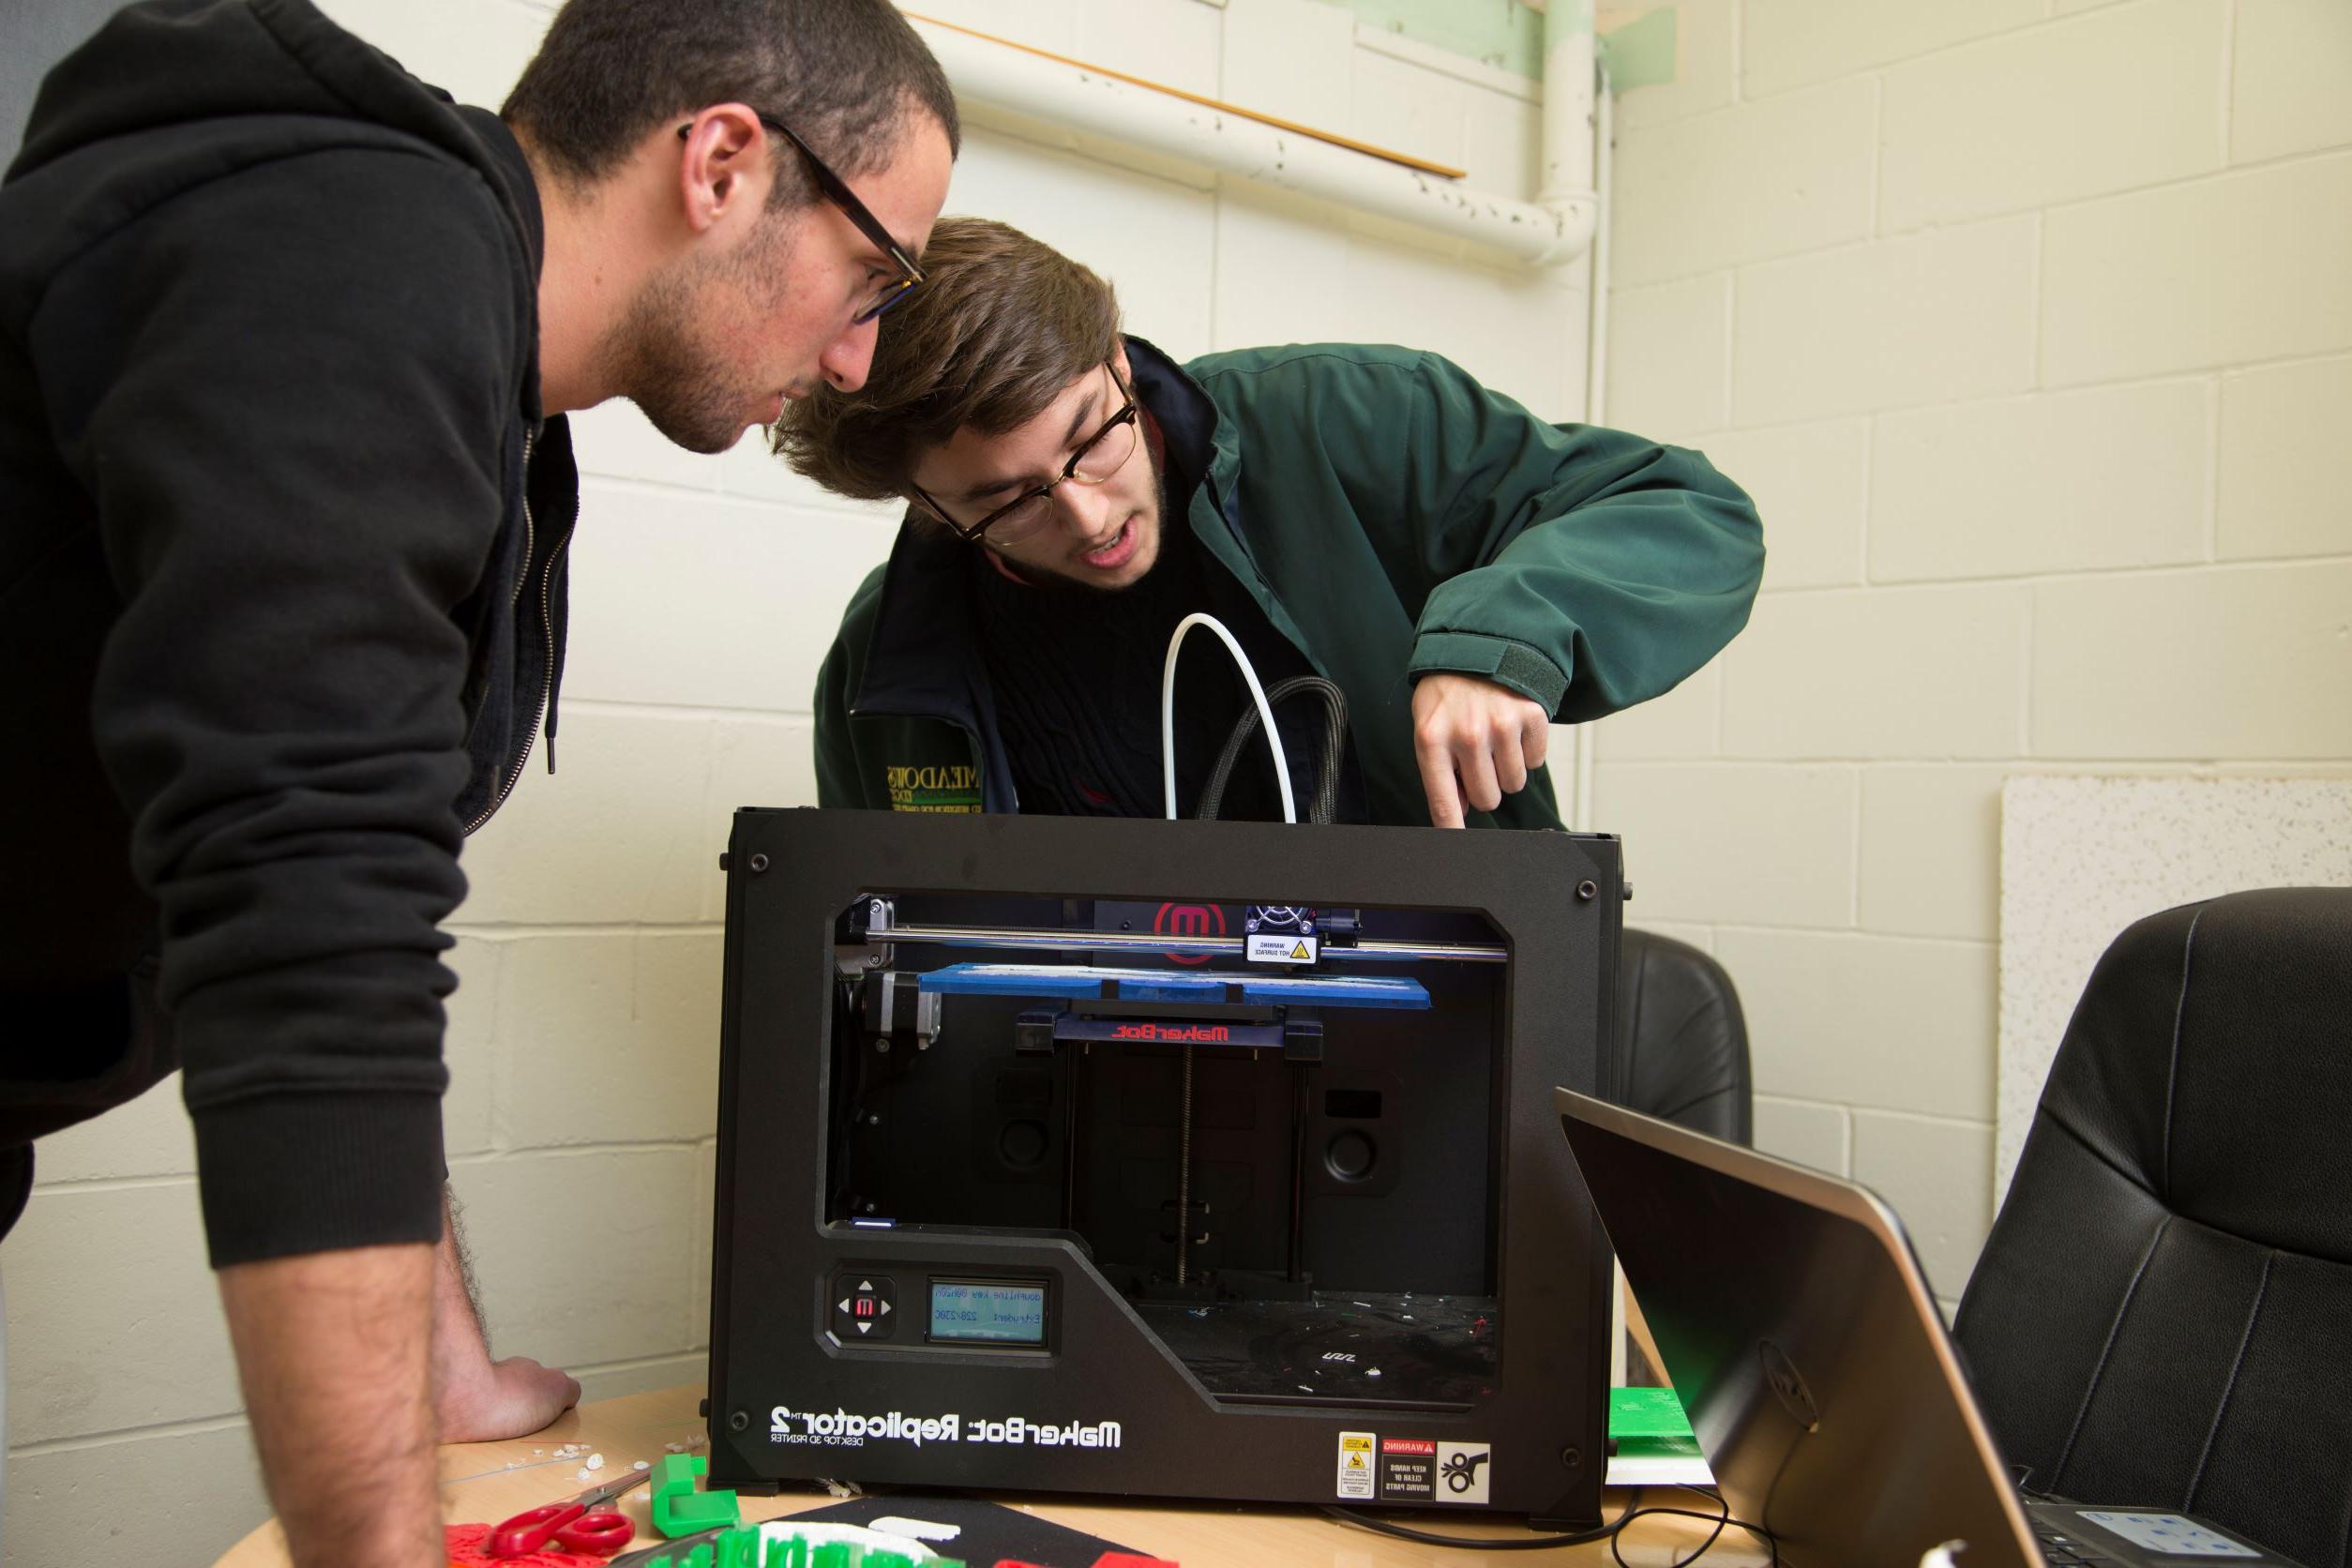 Two engineering students working on a replicator machine.